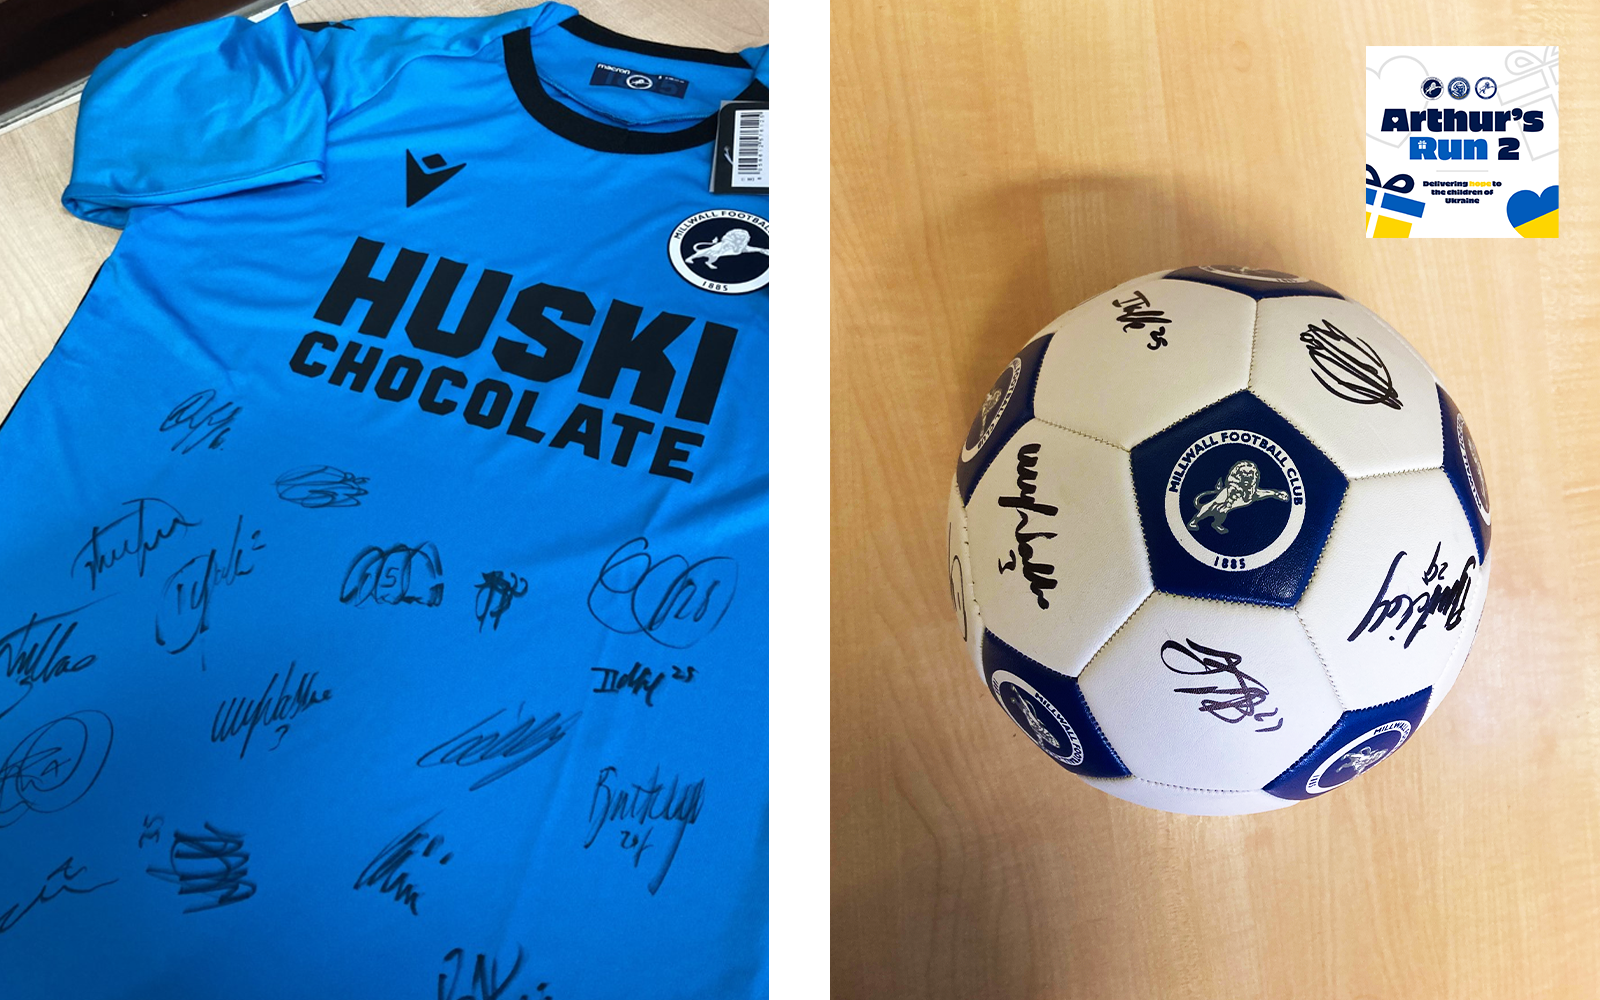 Signed Millwall Jersey and Football Auctions for Ukraine